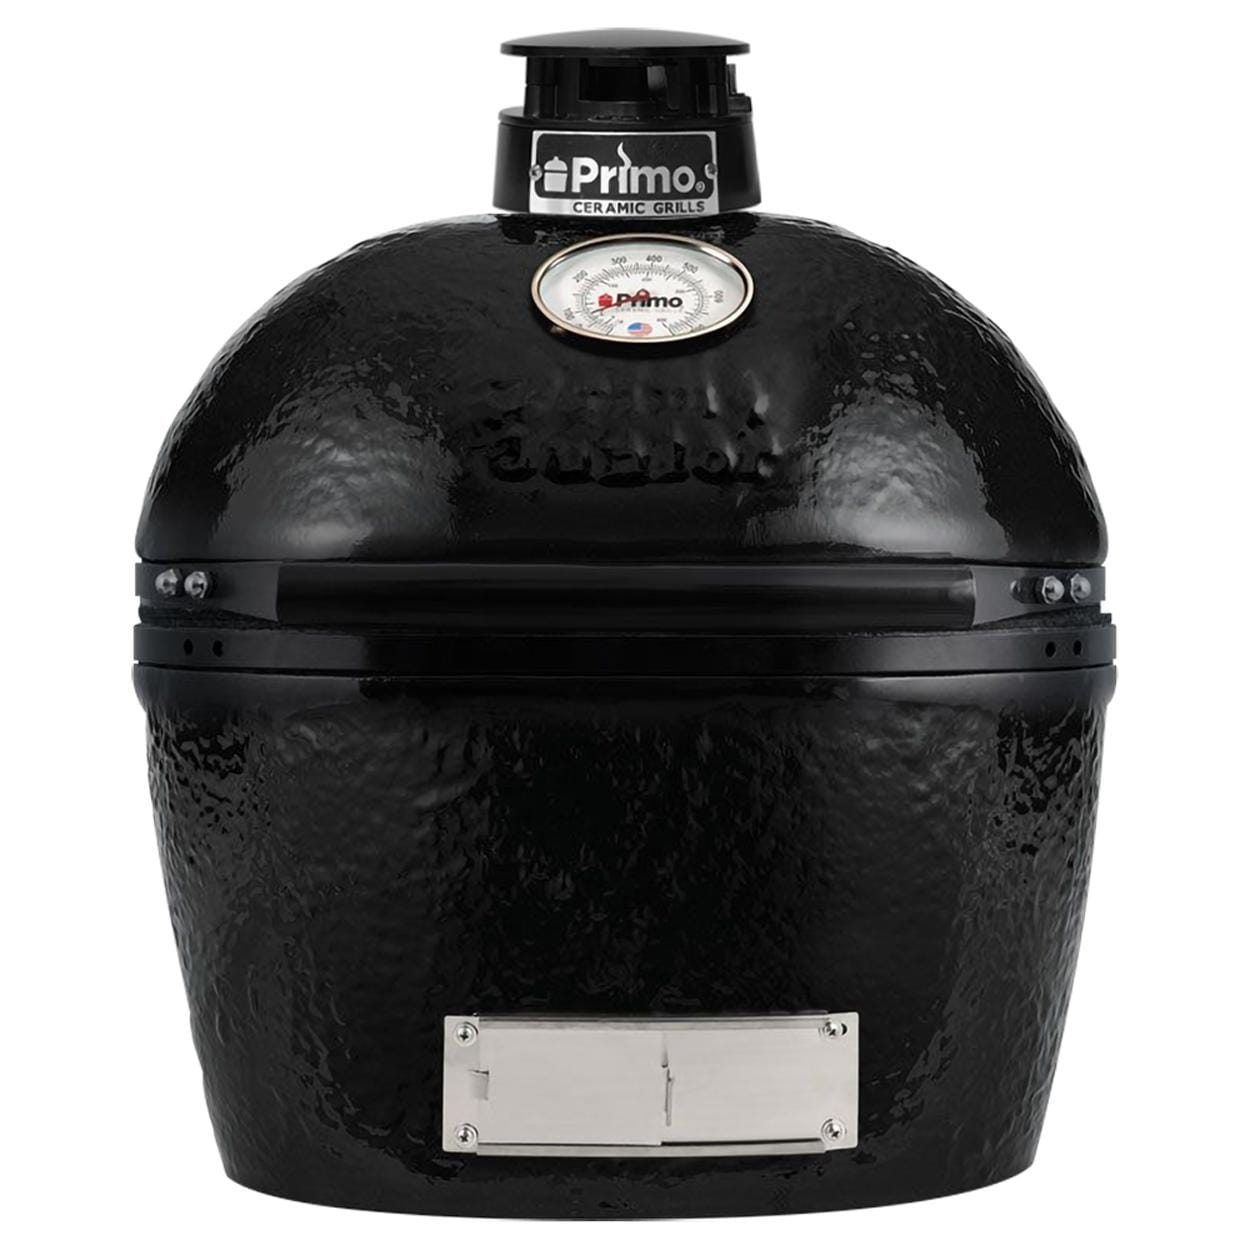 Primo Oval Junior 200 Ceramic Kamado Grill With Stainless Steel Grates - PGCJRH (2021) - image 1 of 6